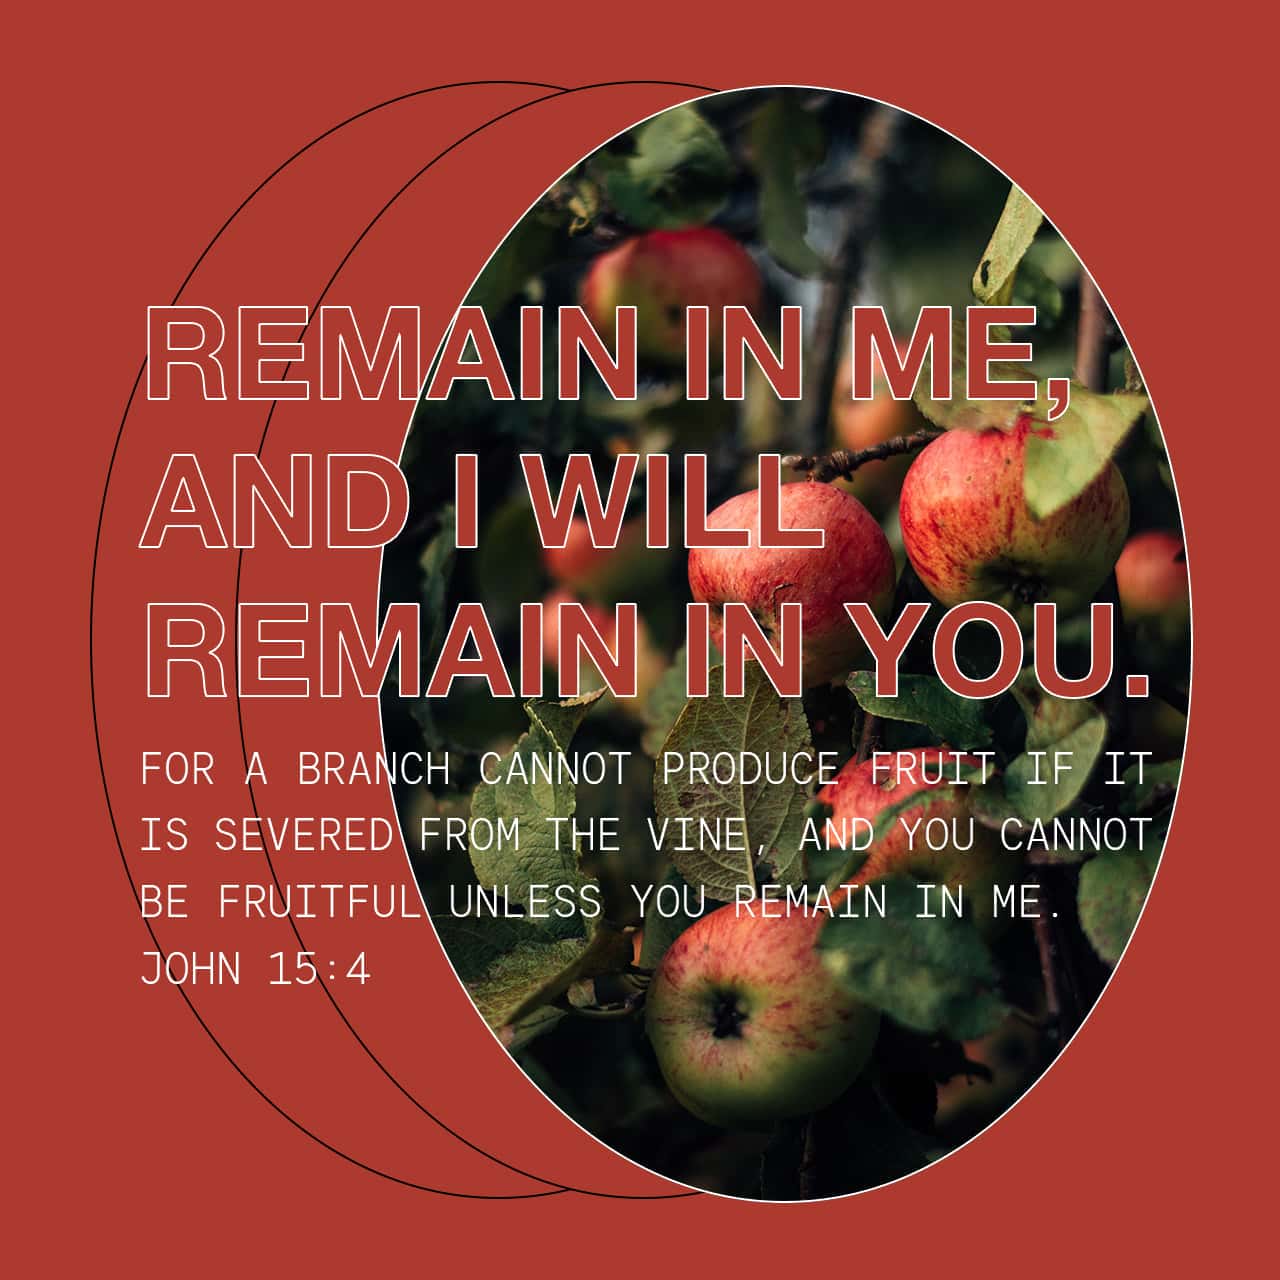 John 15:4 Remain in me, as I also remain in you. No branch can bear fruit  by itself; it must remain in the vine. Neither can you bear fruit unless  you remain